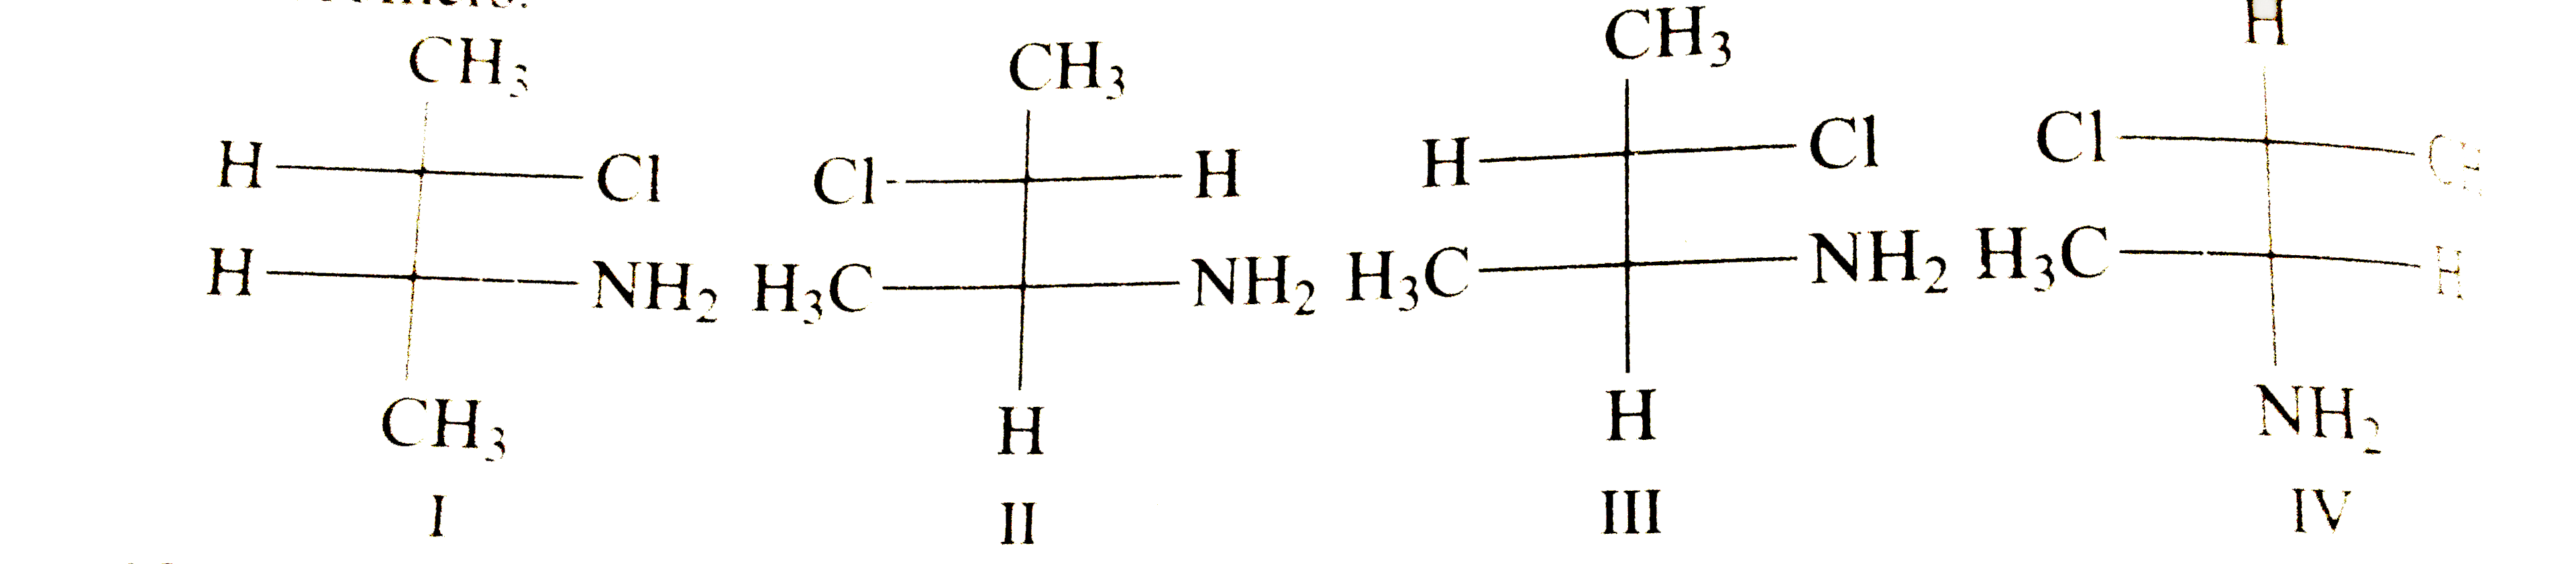 R,S-configuration is a useful tool for determination of enantiomers, diasteromers and homomers. If configuration of all chiral centers are opposite then structures are enantiomers, if all chiral centers have same configuration then they are homomers and if some have same confguration and some have opposite configuration then they are diastereomers.    Which of hte following is not diastereomer?